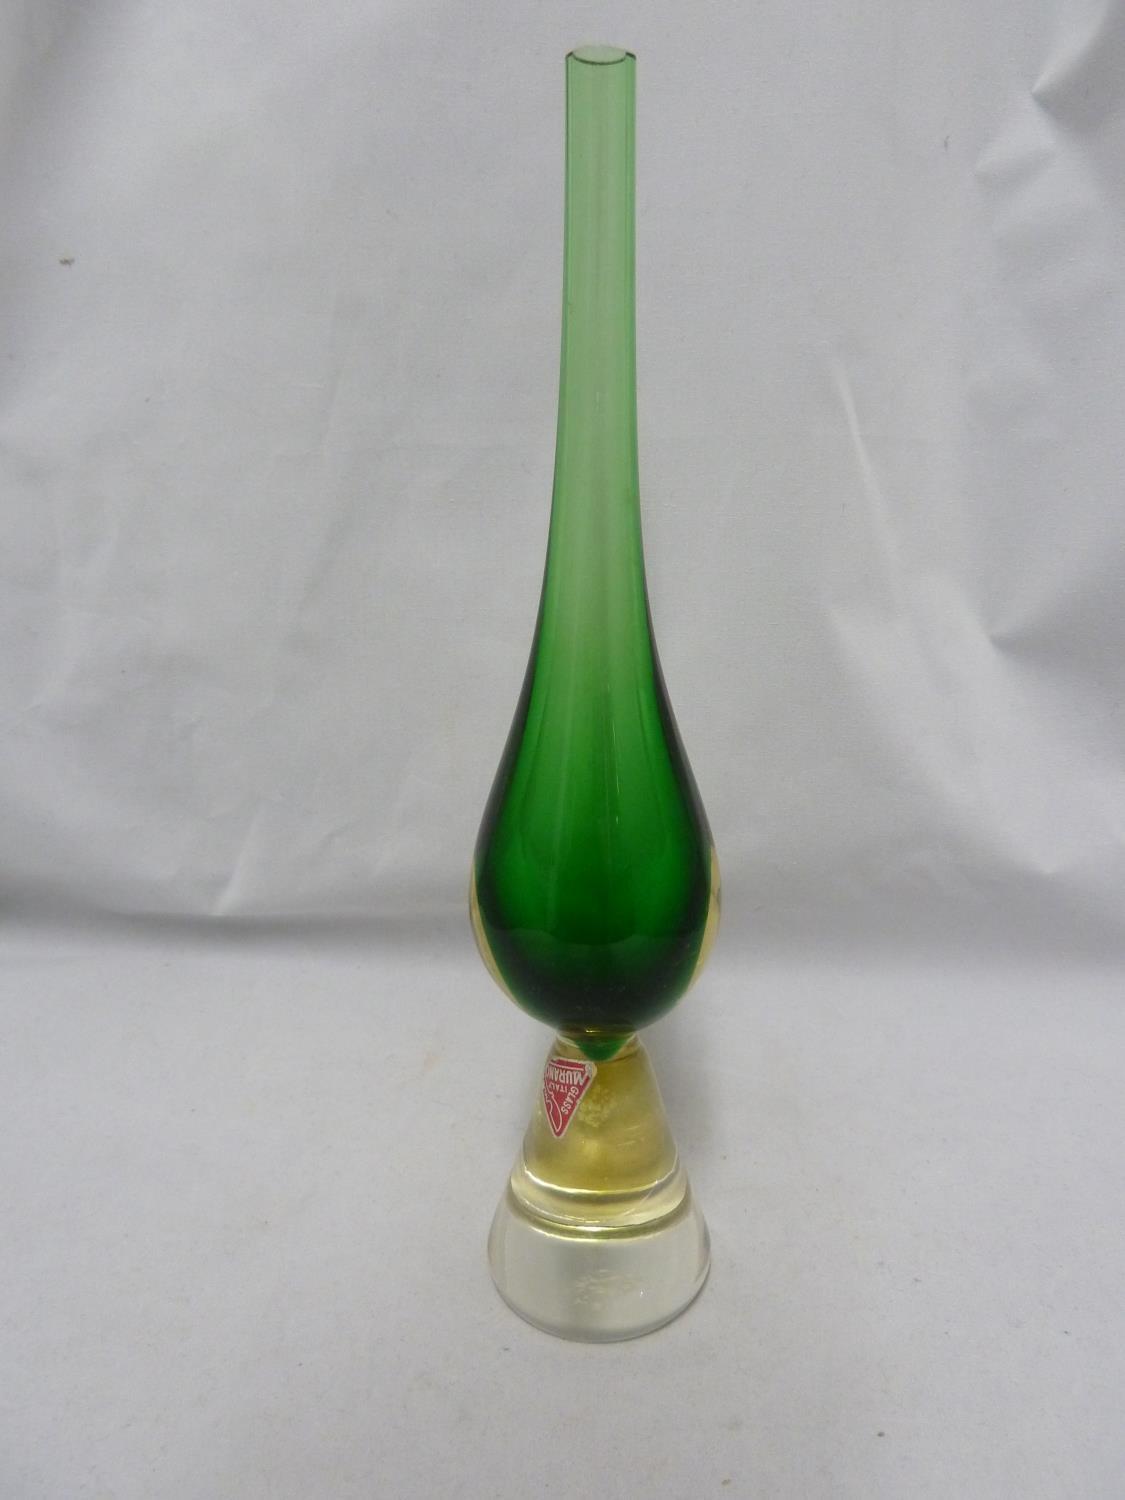 Luciano Gaspari for Salviati - a green glass teardrop vase on sommerso yellow/colourless conical